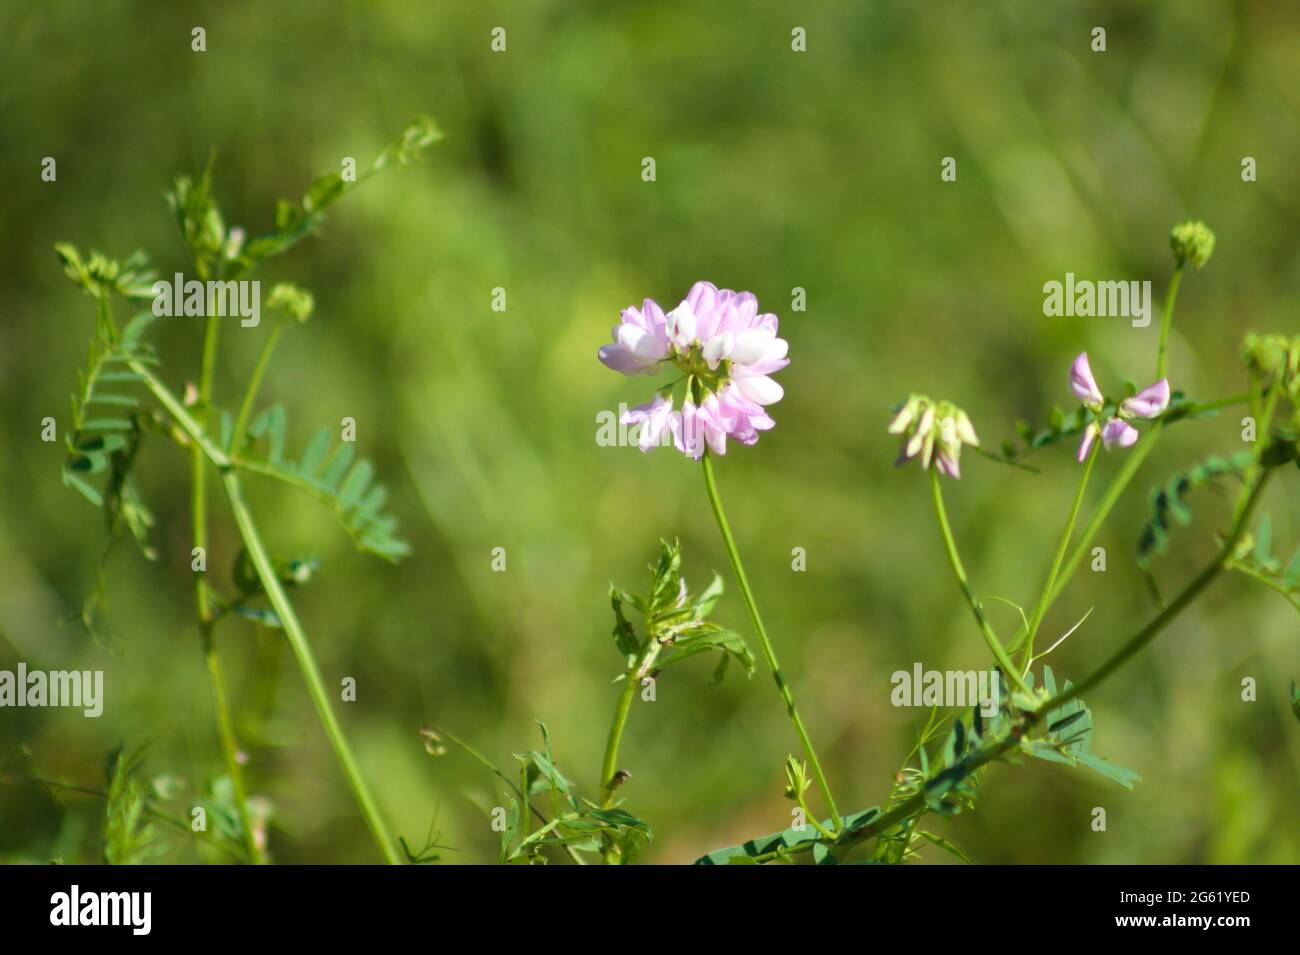 Common crownvetch in bloom close-up view with green background Stock Photo